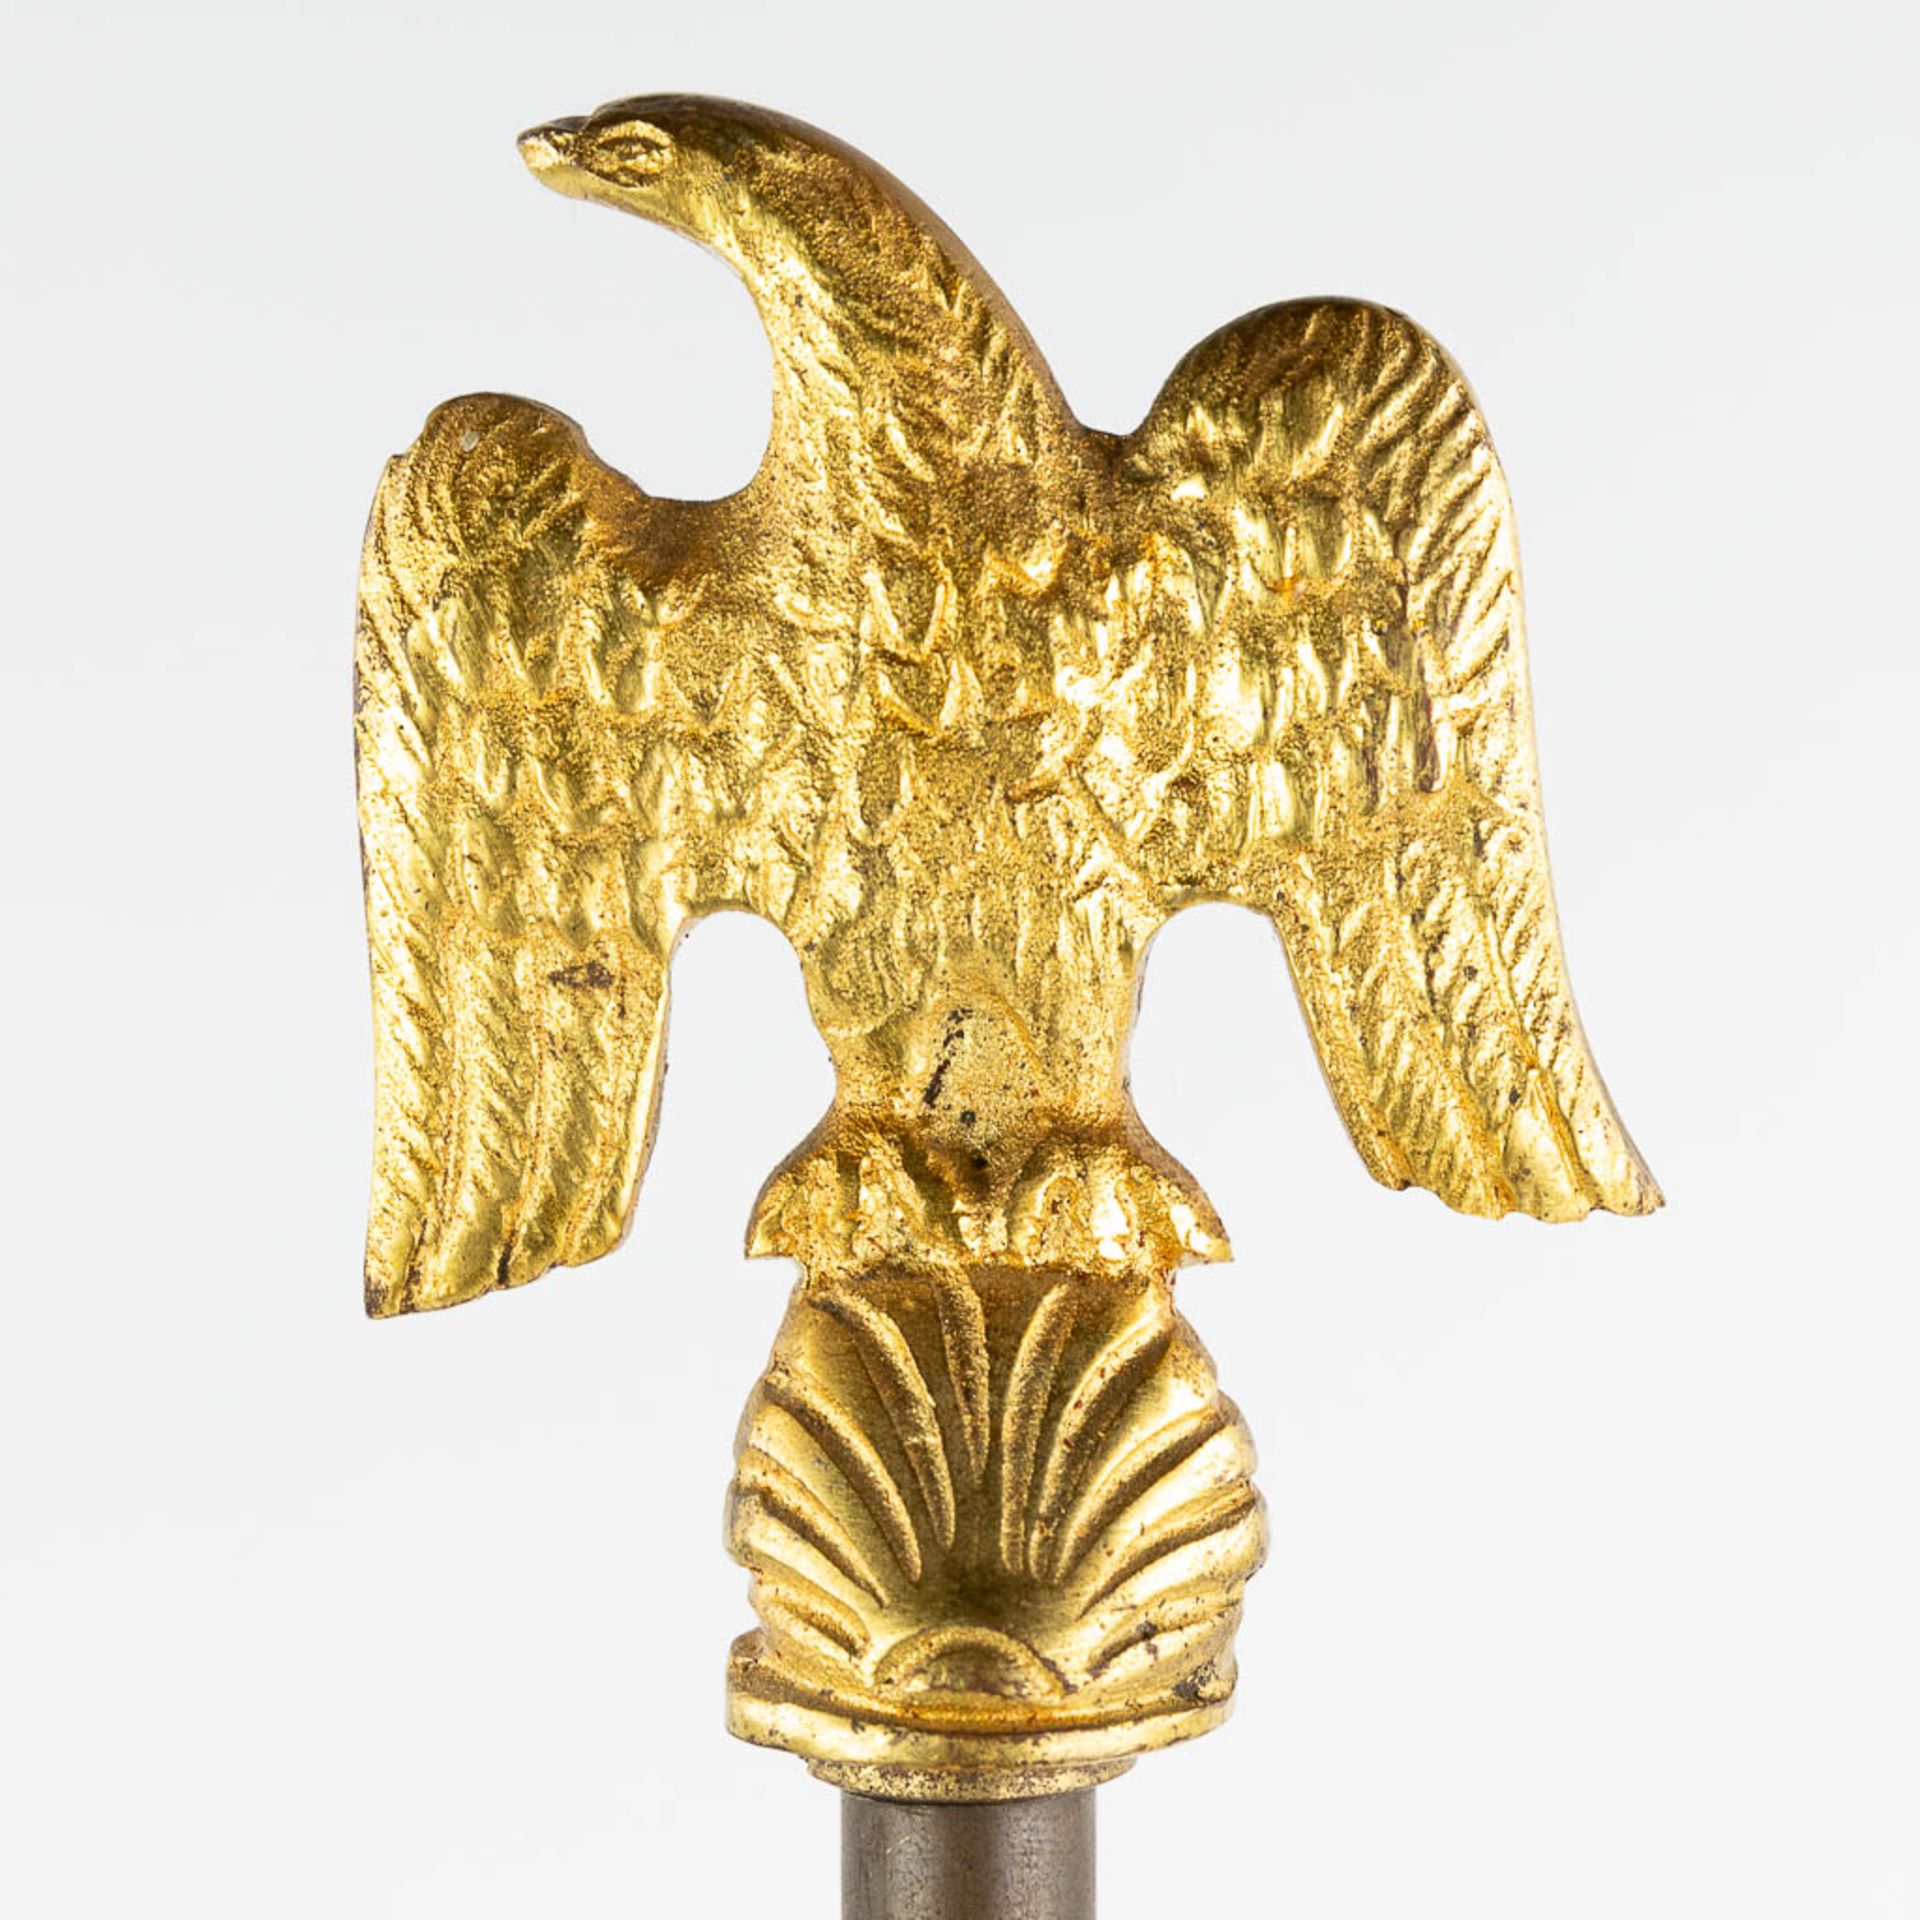 A table lamp, brass and onyx. 20th century. (L: 30 x W: 30 x H: 77 cm) - Image 7 of 13